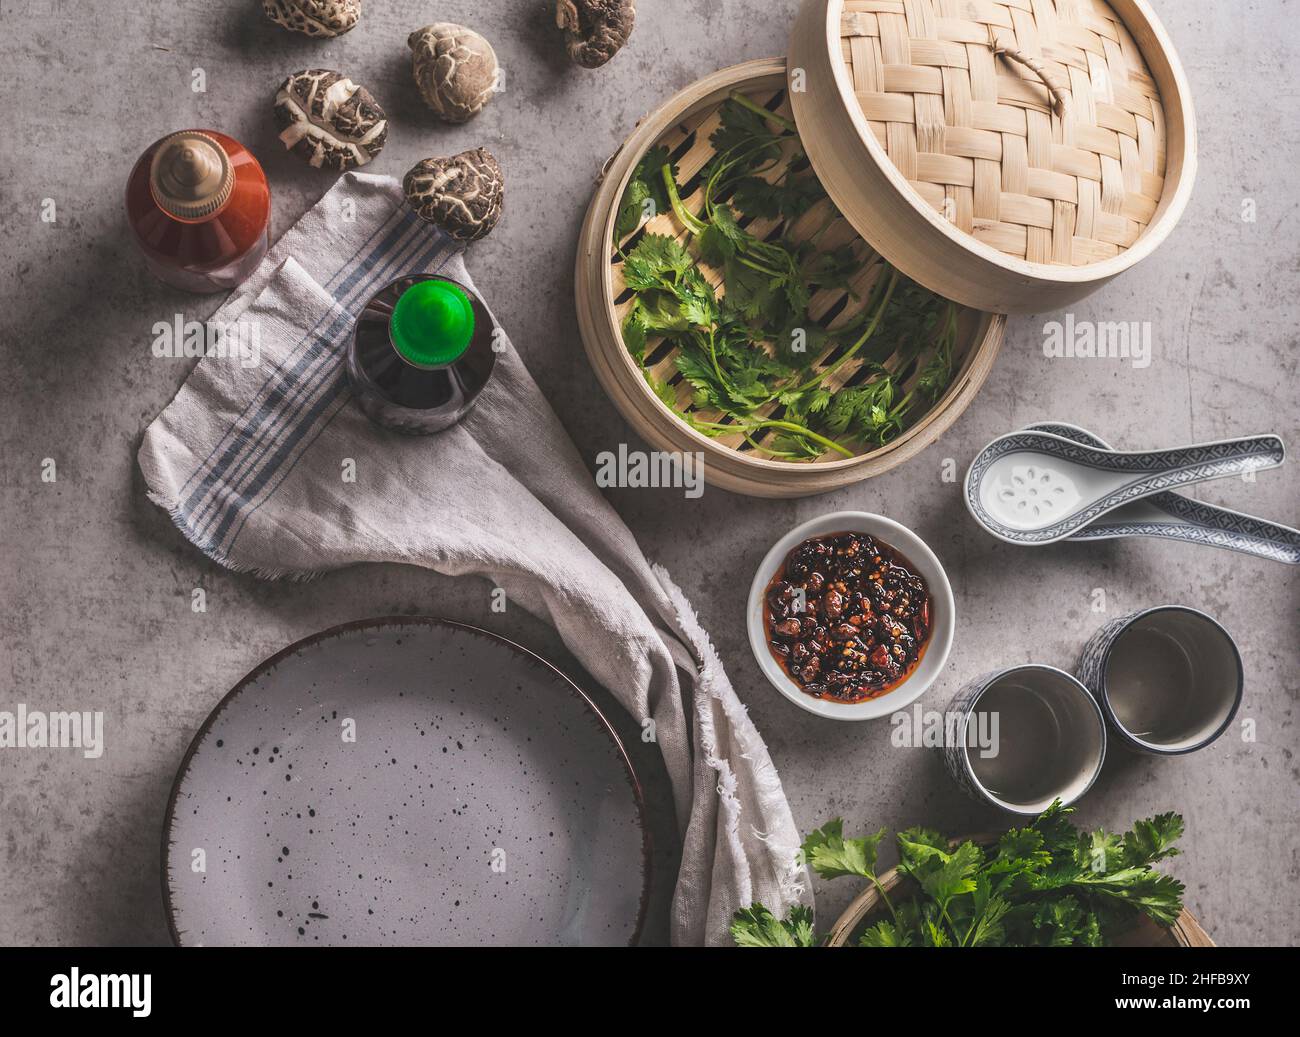 Asian food on grey concrete: shiitake mushrooms, steaming basket, hoisin sauce, coriander and spicy dip, empty plate and traditional crockery. Food ba Stock Photo